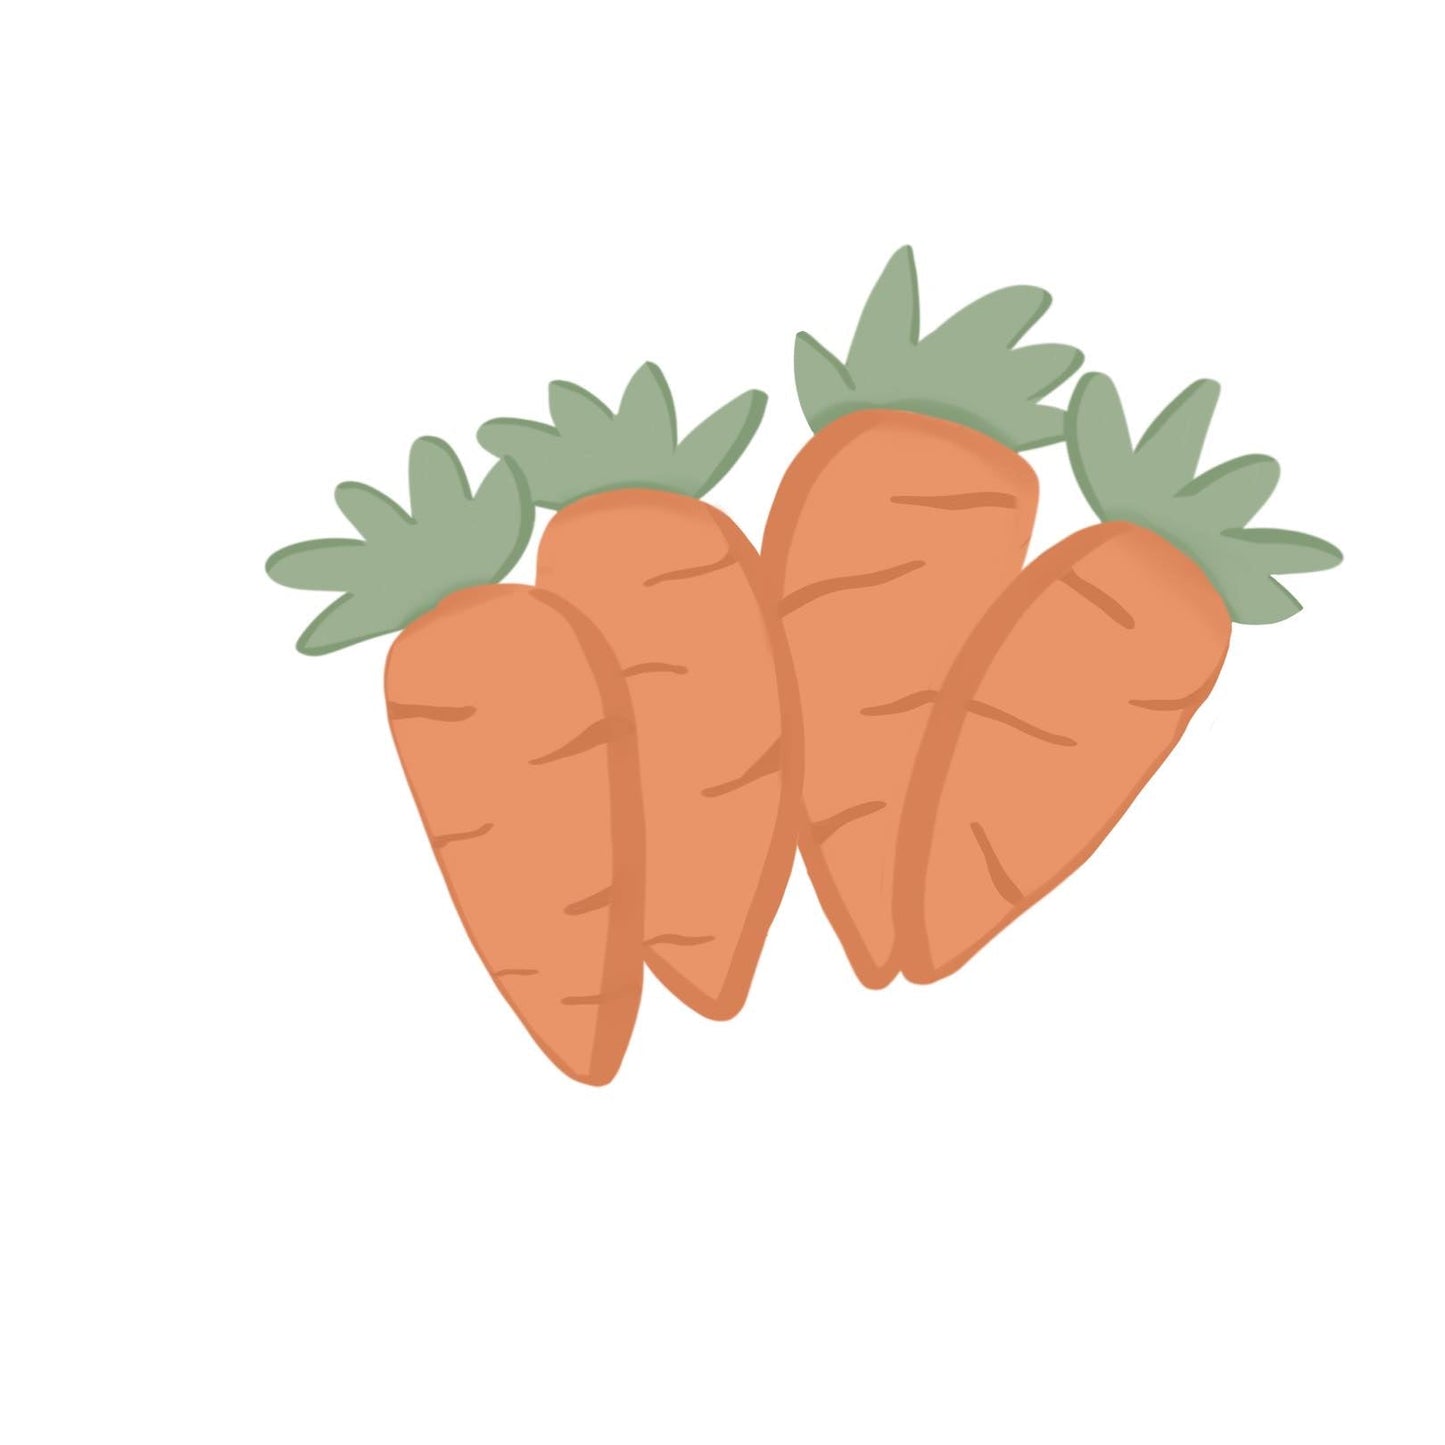 Bunch of Carrots/Bunny Feet Cutter STL File